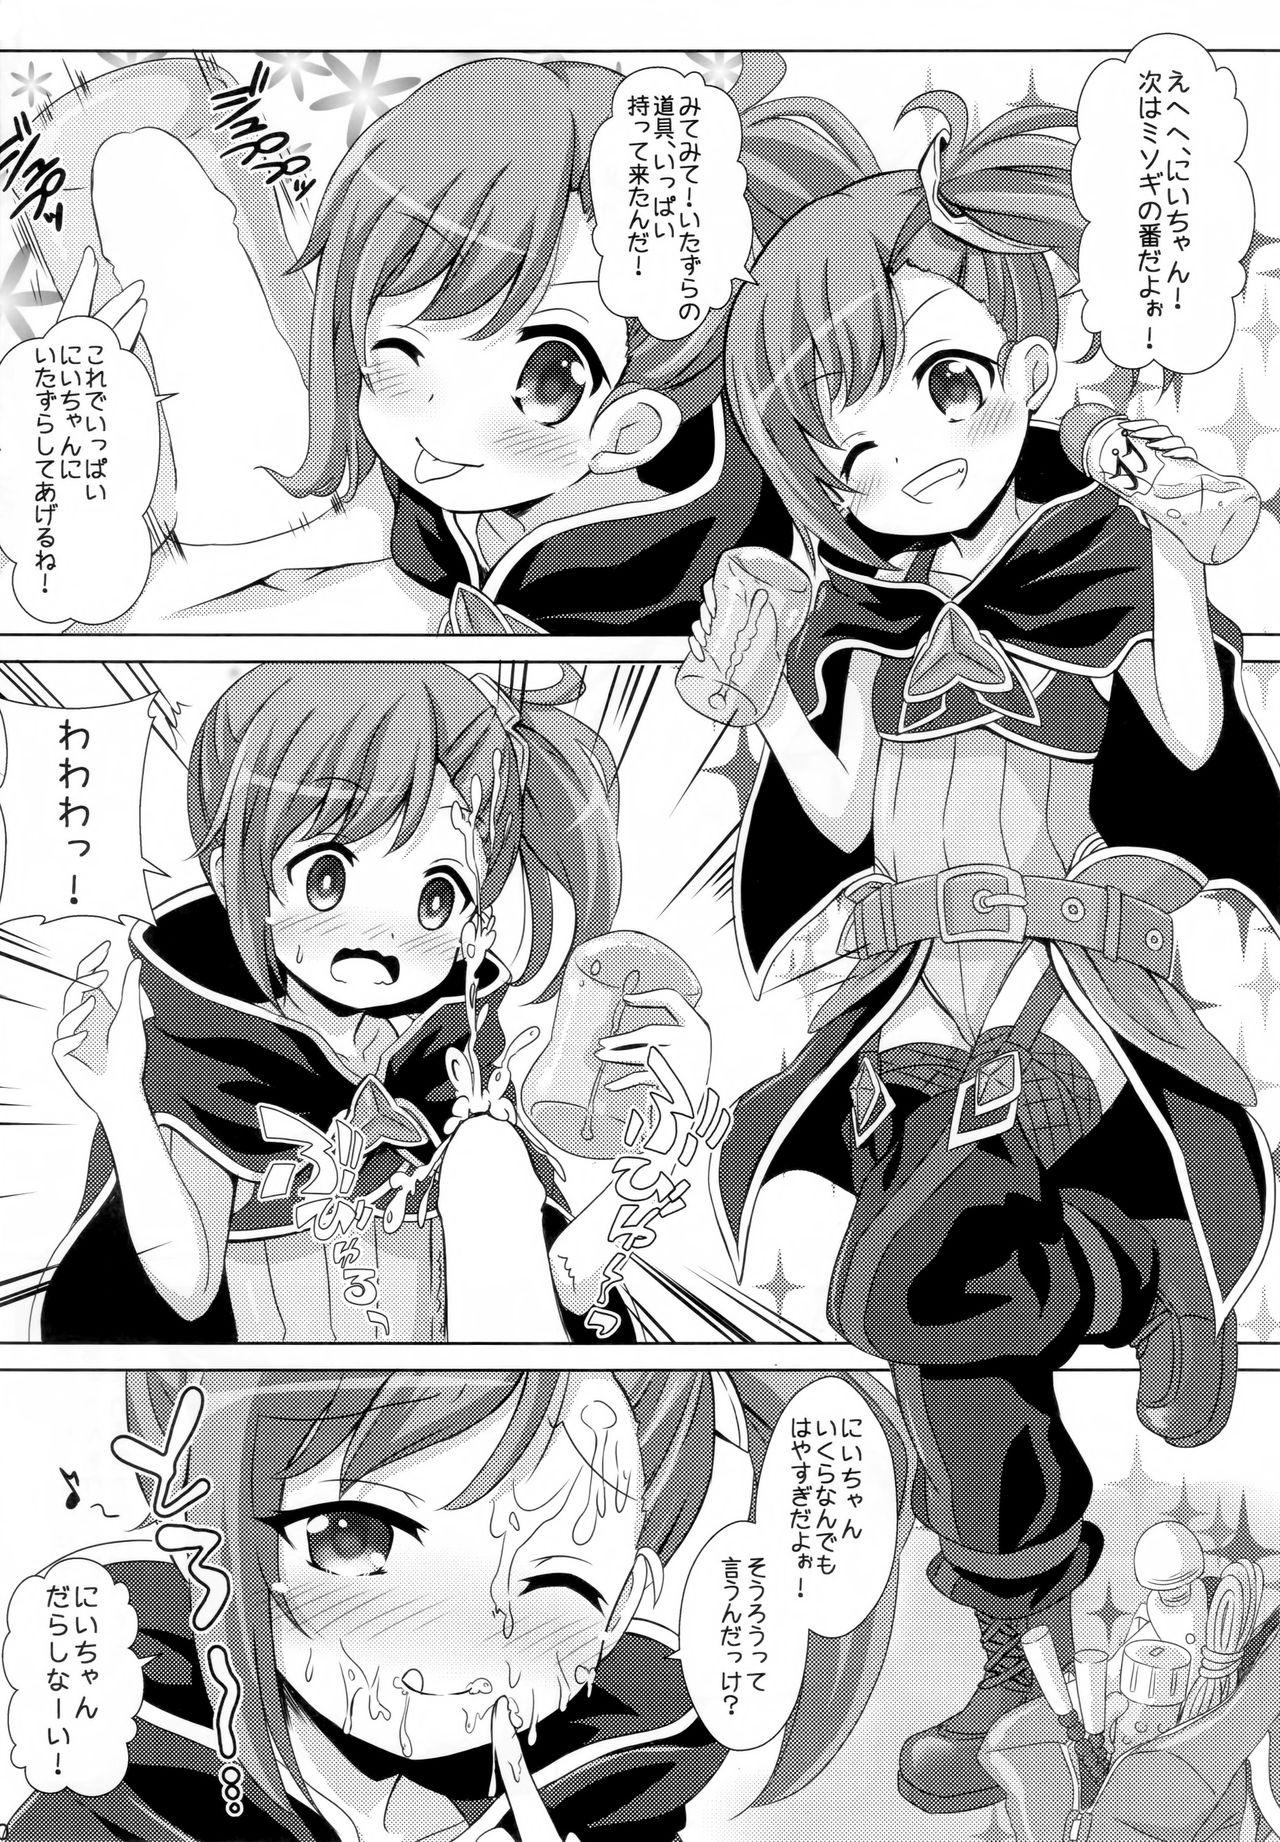 Step Sister Little Lyrical to Nakayoshi Harem - Princess connect Rough Sex - Page 9